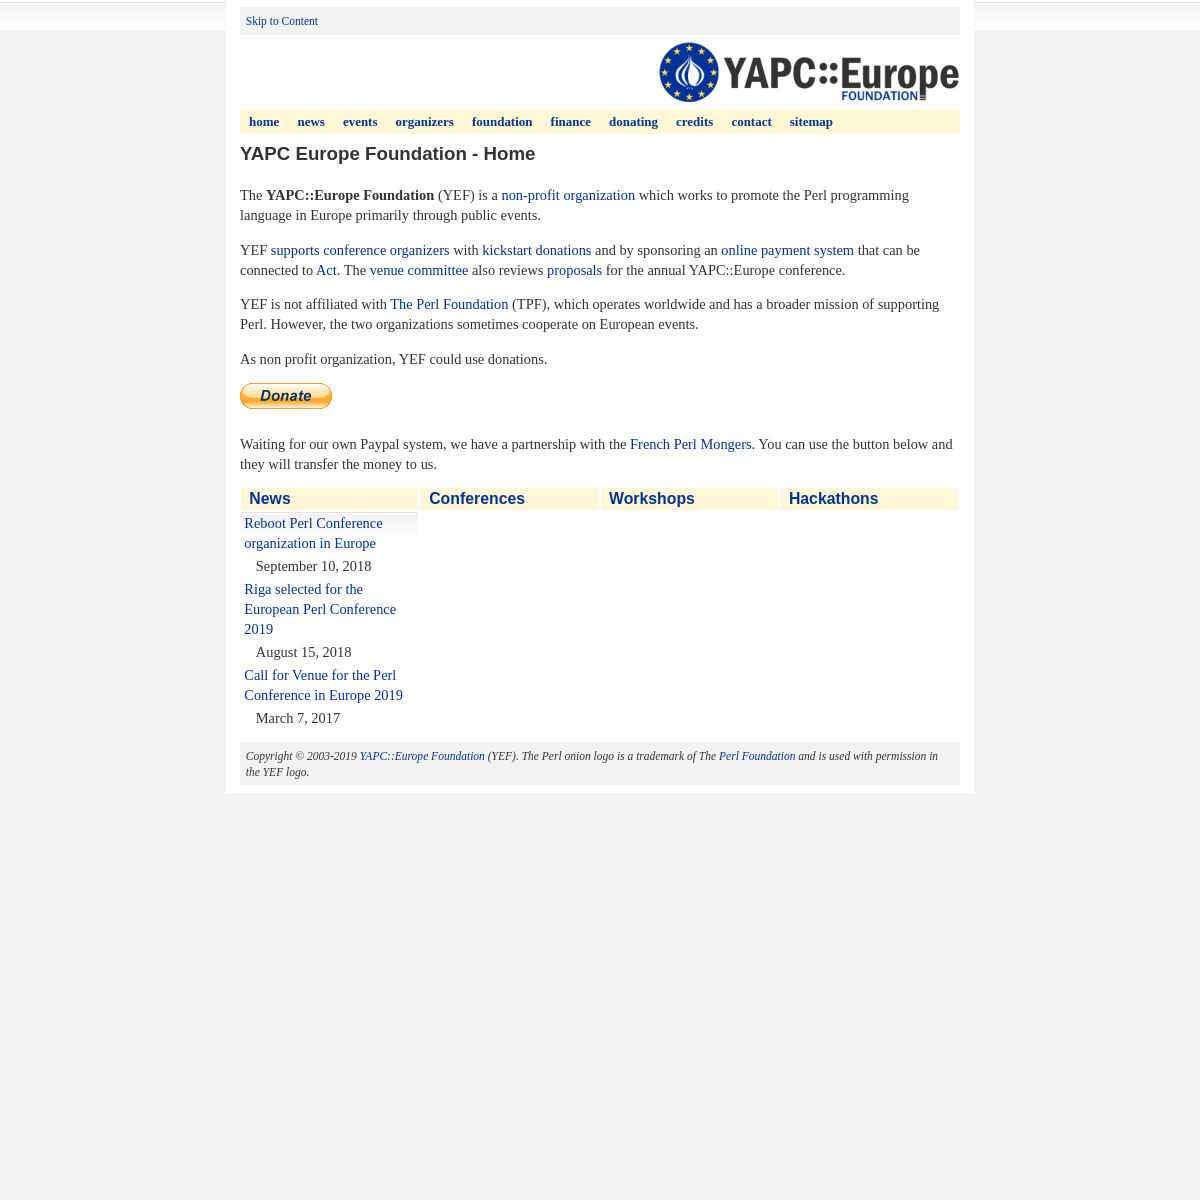 A complete backup of yapceurope.org